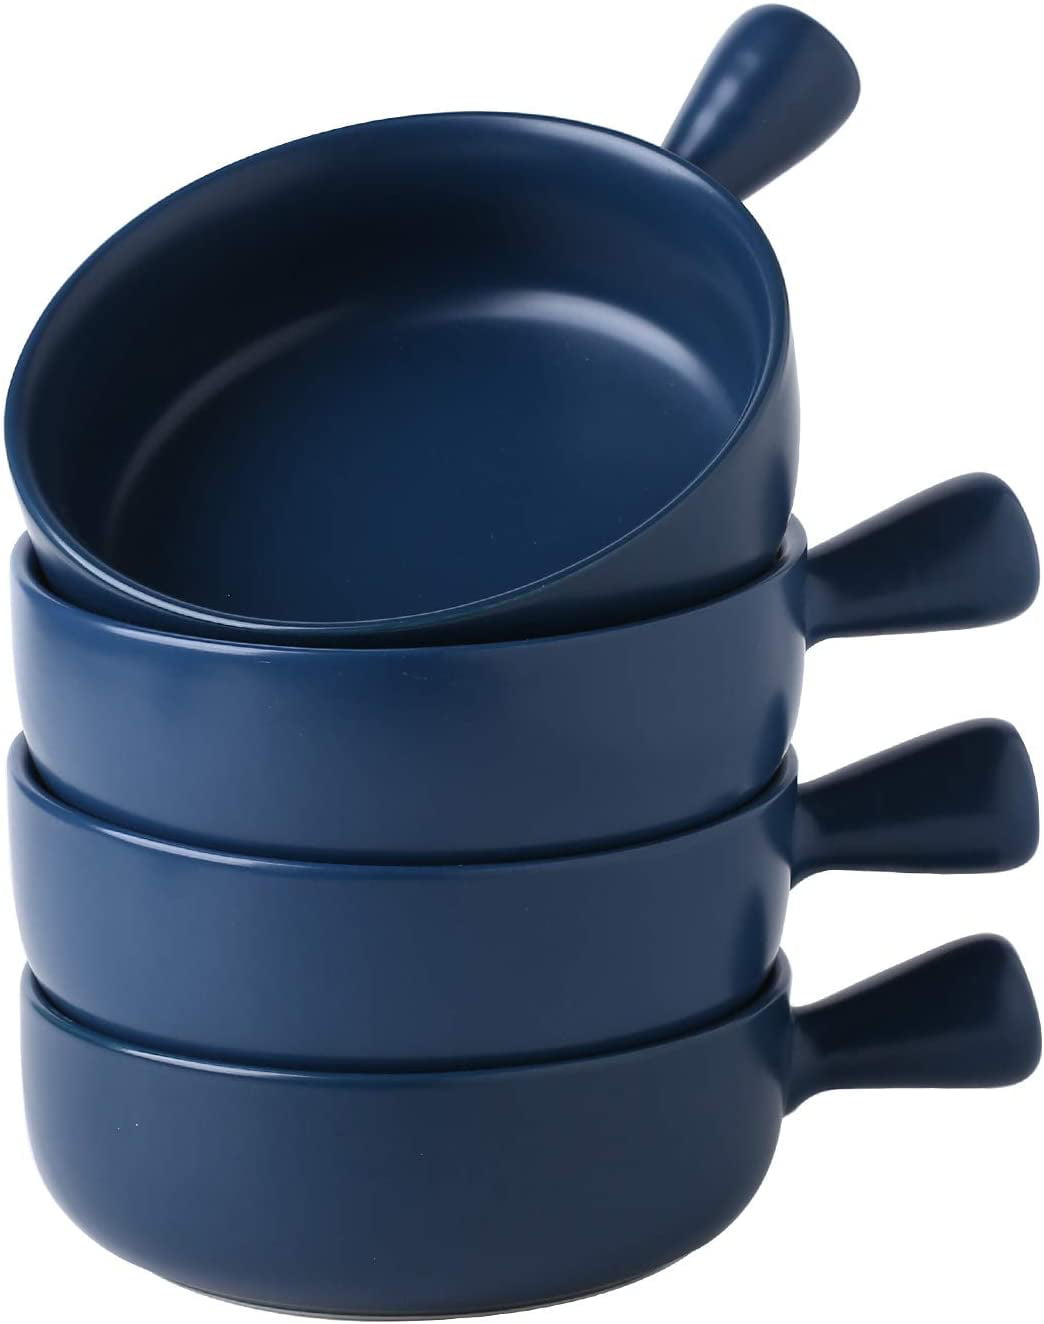 Set of 4 Stew 21 Oz for Cereal Navy Swuut Ceramic Soup Bowls with Handles French Onion Soup Bowls